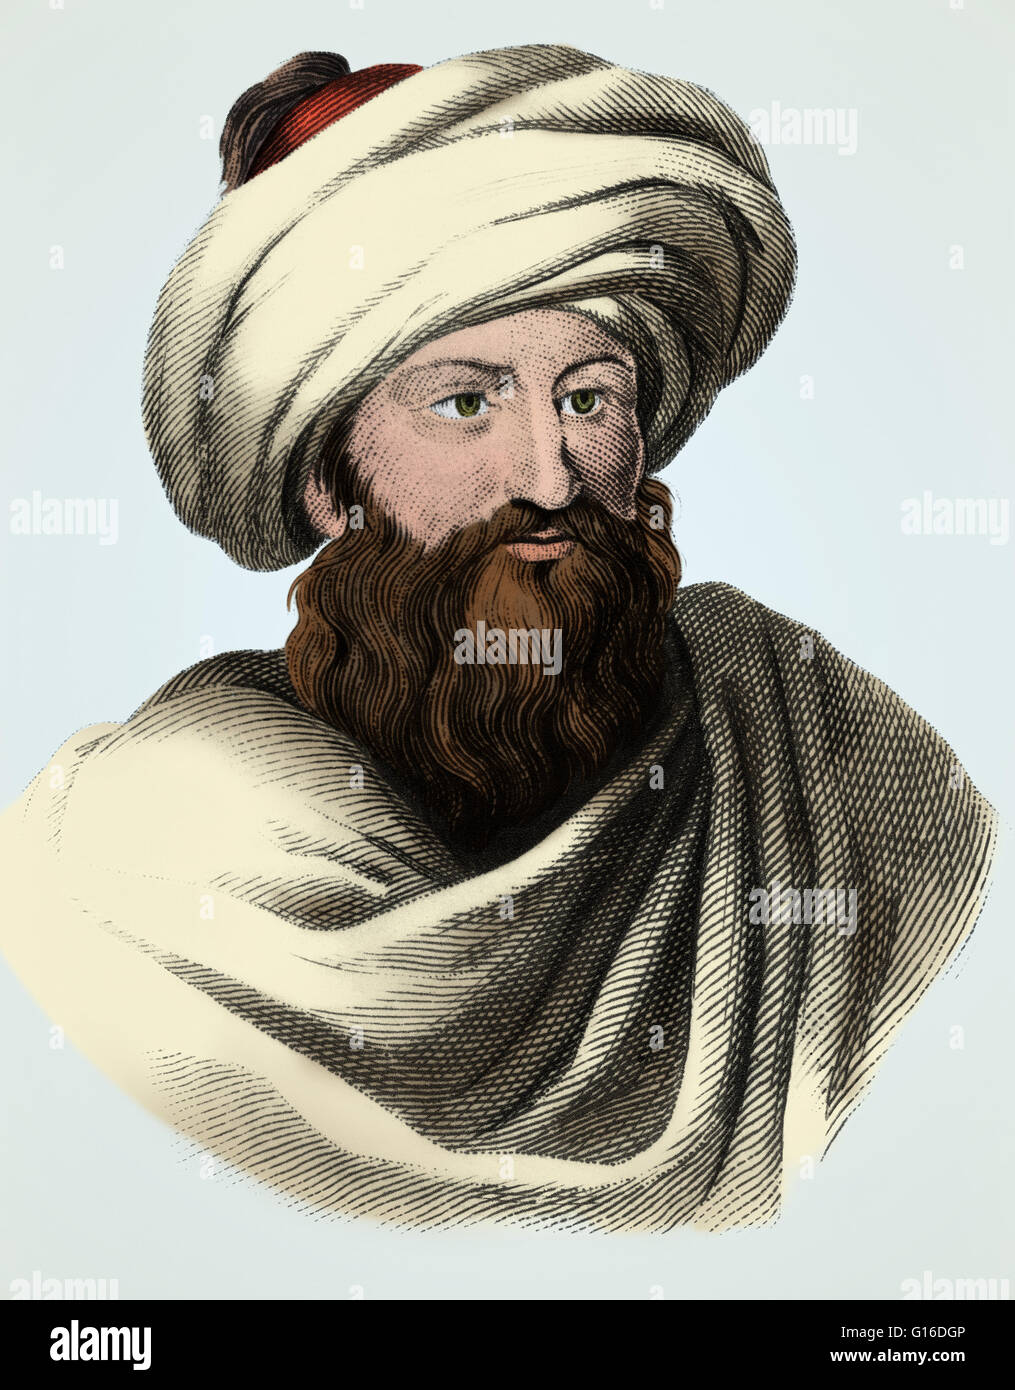 Johann Ludwig Burckhardt (1784-1817) was a Swiss traveller and orientalist.  He wrote his letters in French and signed Louis. He studied in Leipzig,  University of Göttingen and briefly studied Arabic at the